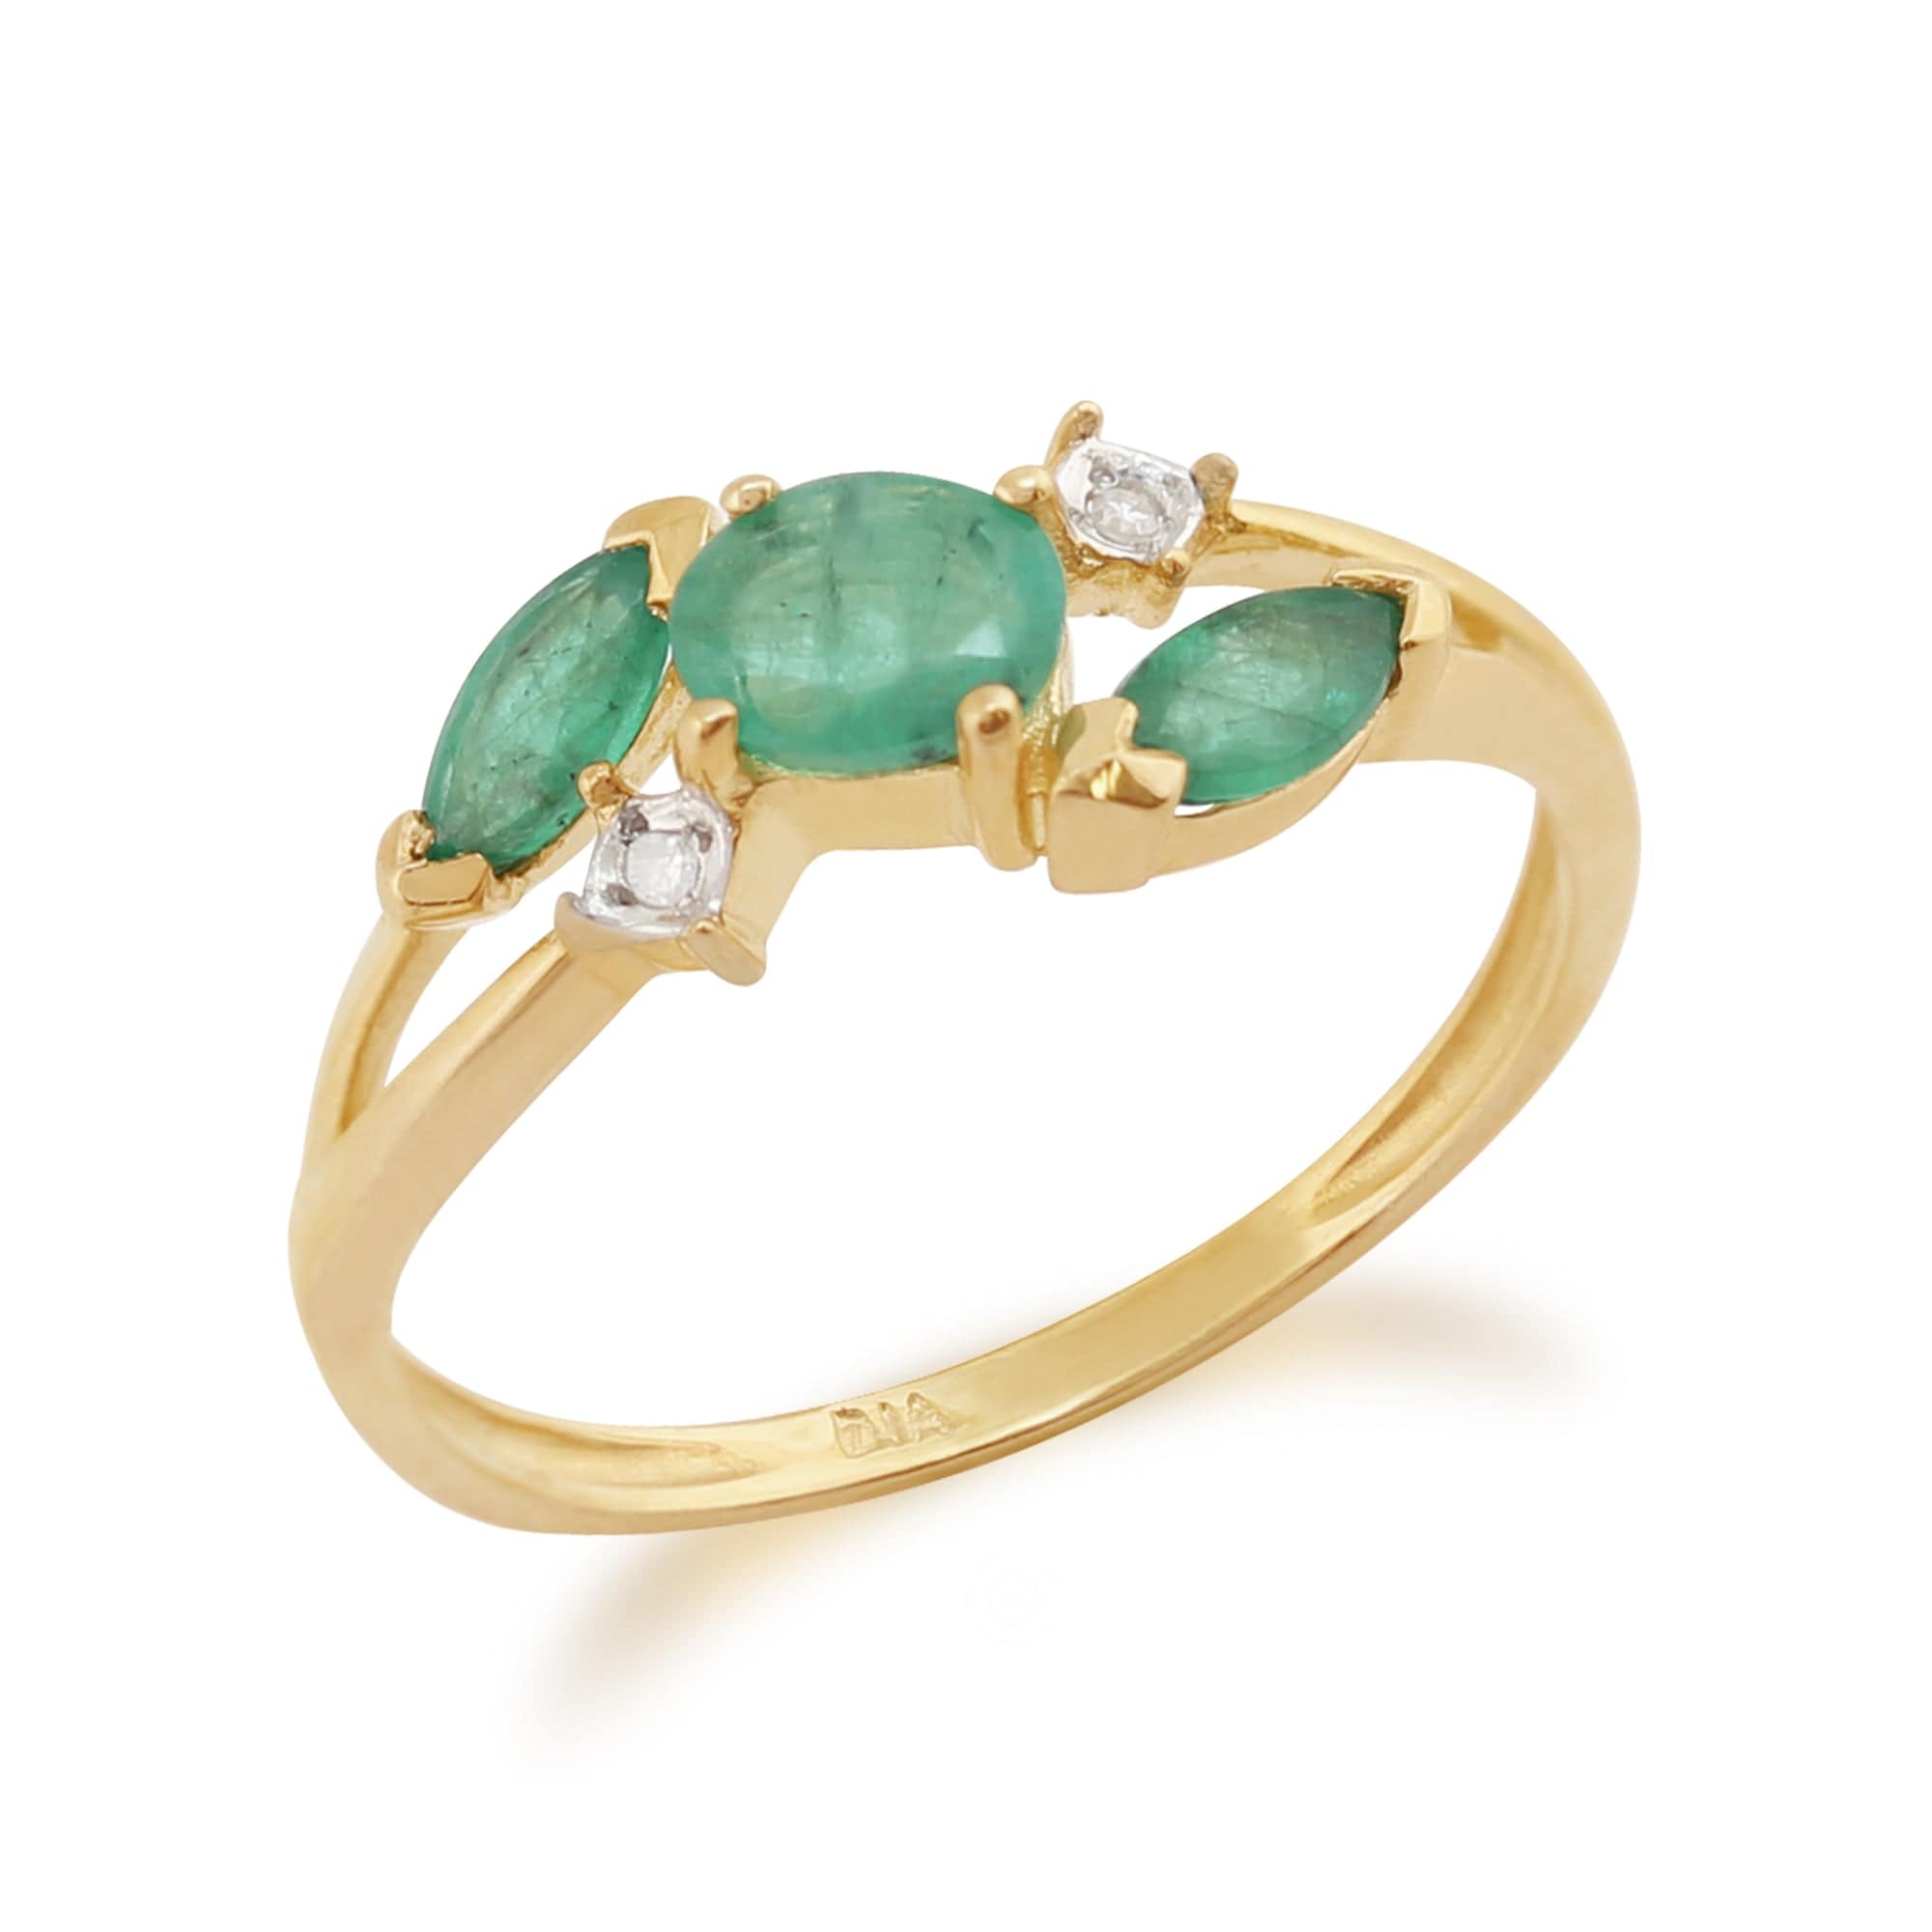 25342 Contemporary Marquise Emerald & Diamond Three Stone Ring in 9ct Yellow Gold 2